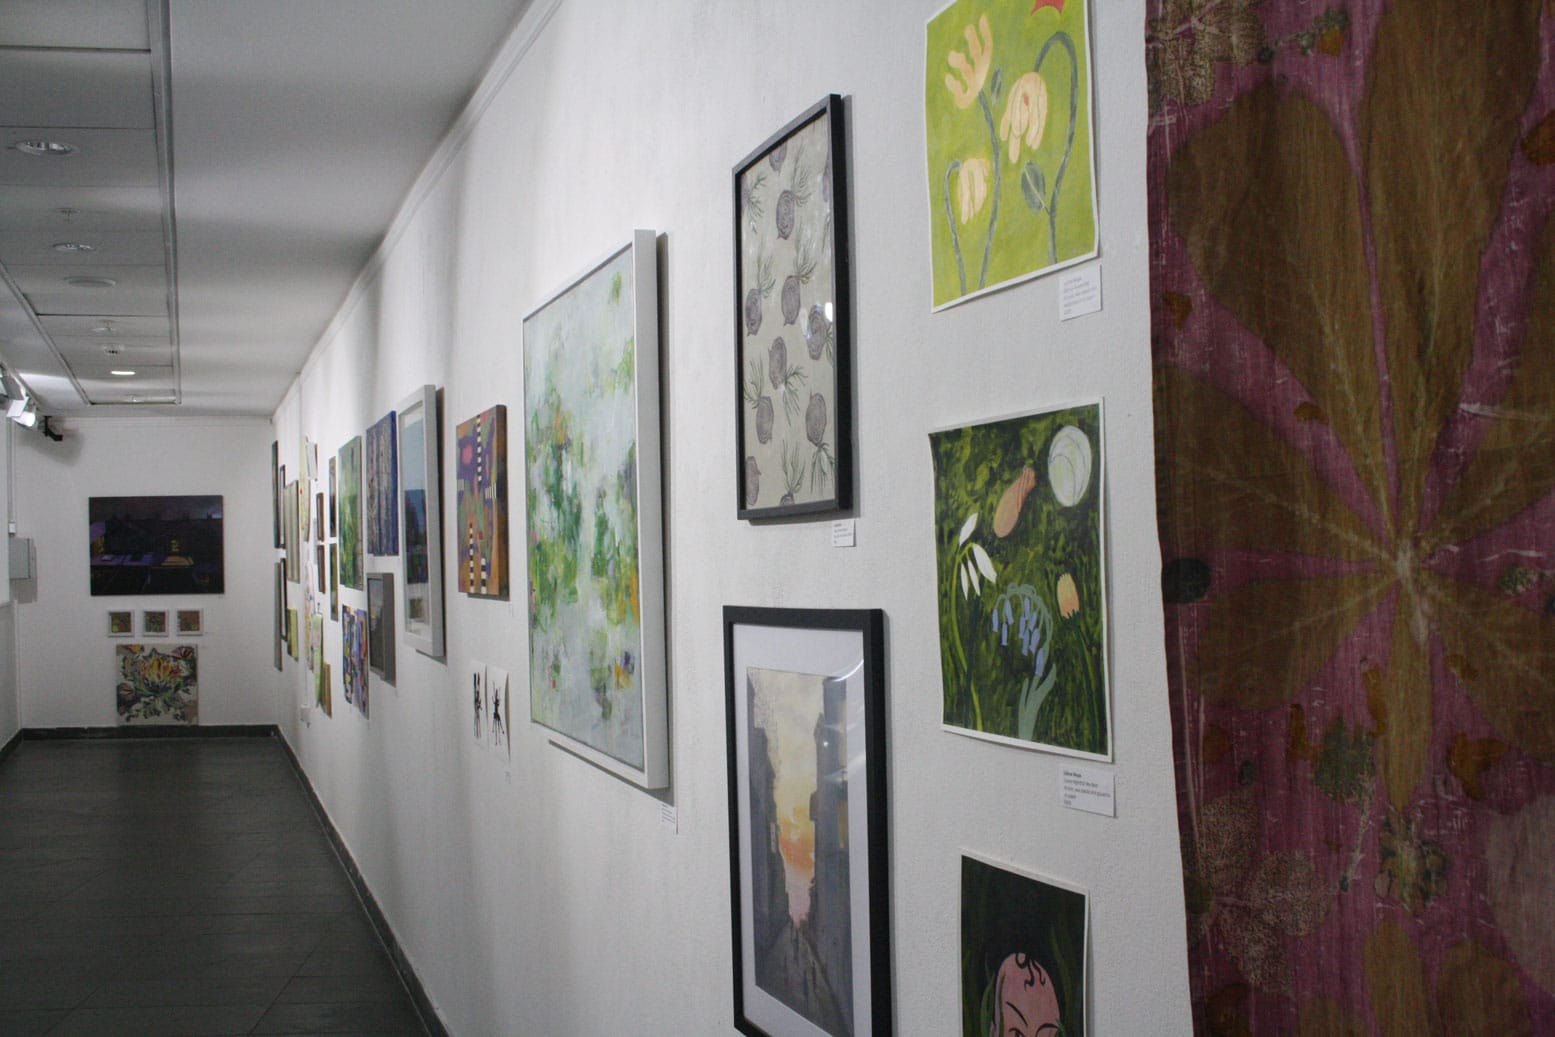 An exhibition on the Exhibition Wall. A white-washed wall with a variety of framed artworks.